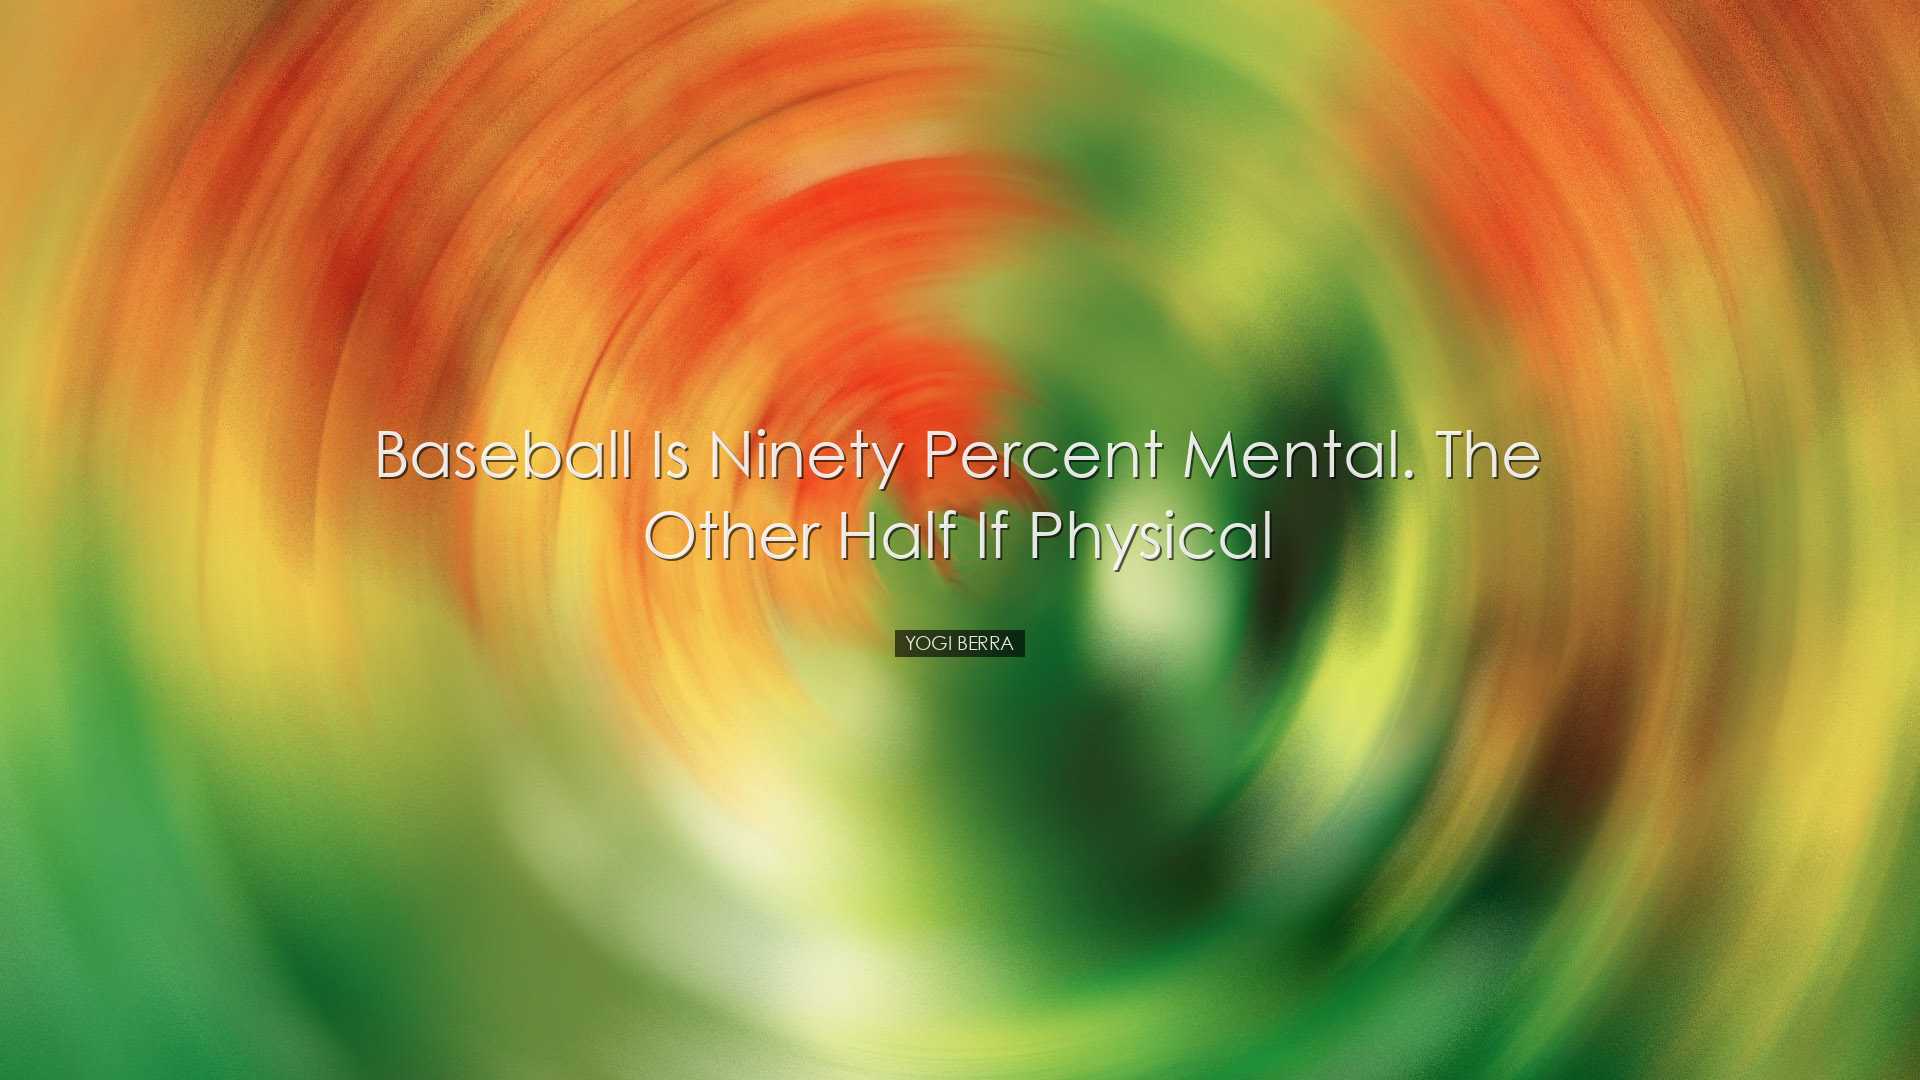 Baseball is ninety percent mental. The other half if physical - Yo